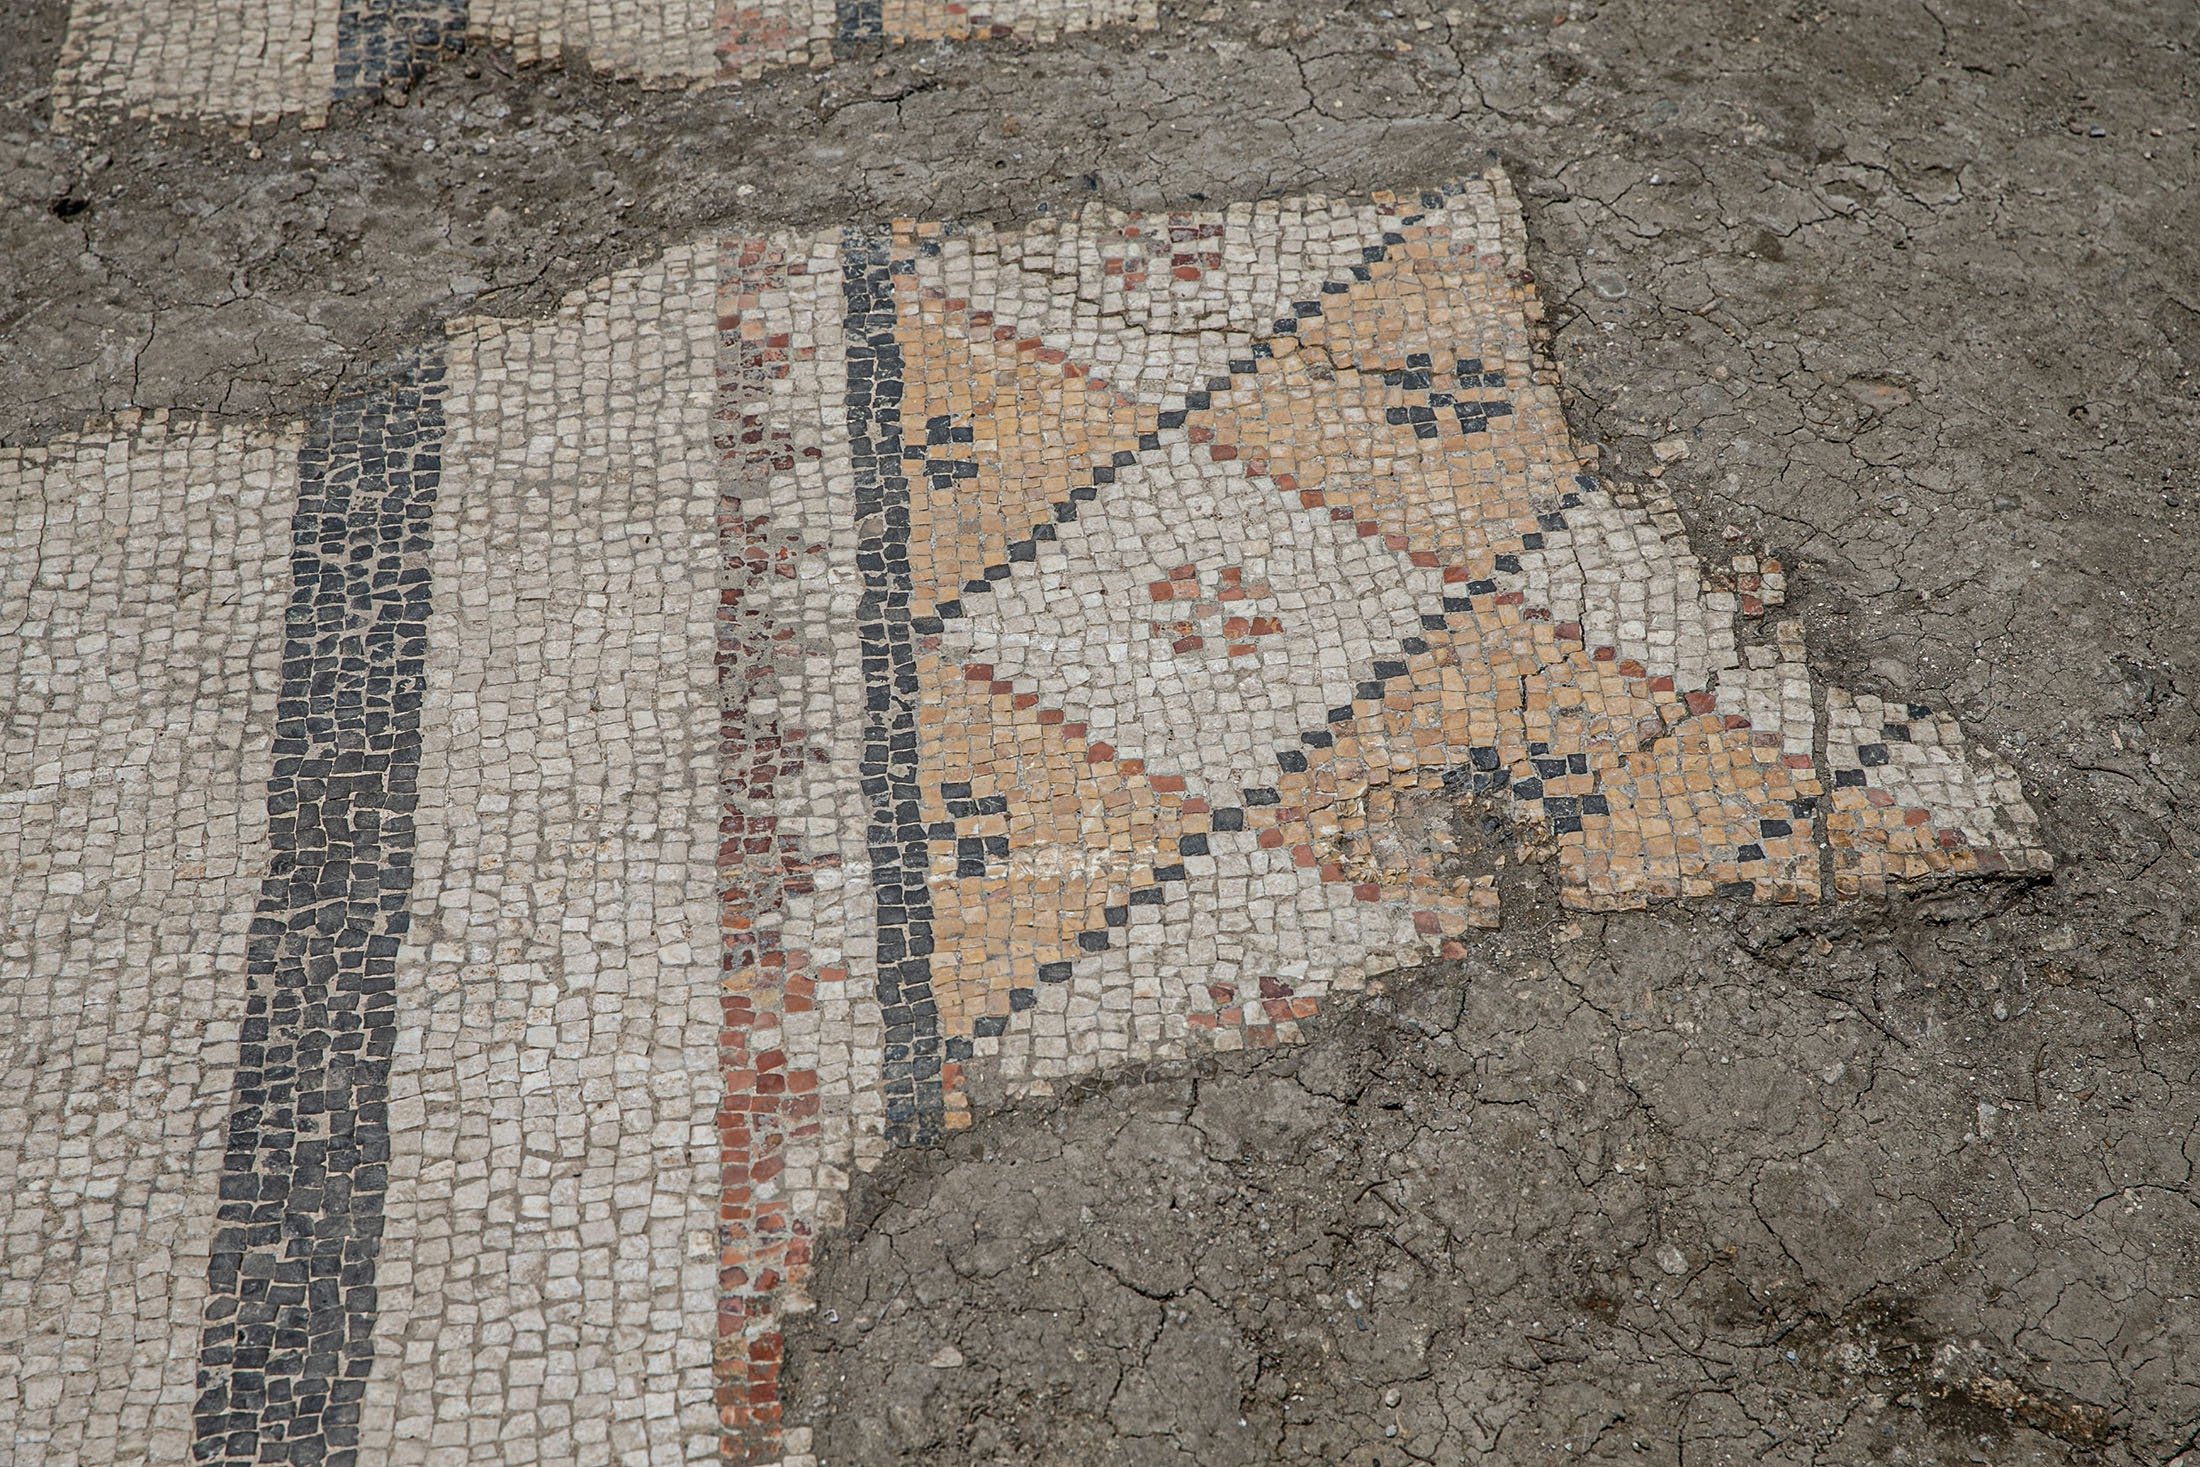 The mosaic on the floor of a recently discovered Roman villa in the Defne district of Hatay, southern Turkey, July 4, 2022. (AA Photo)